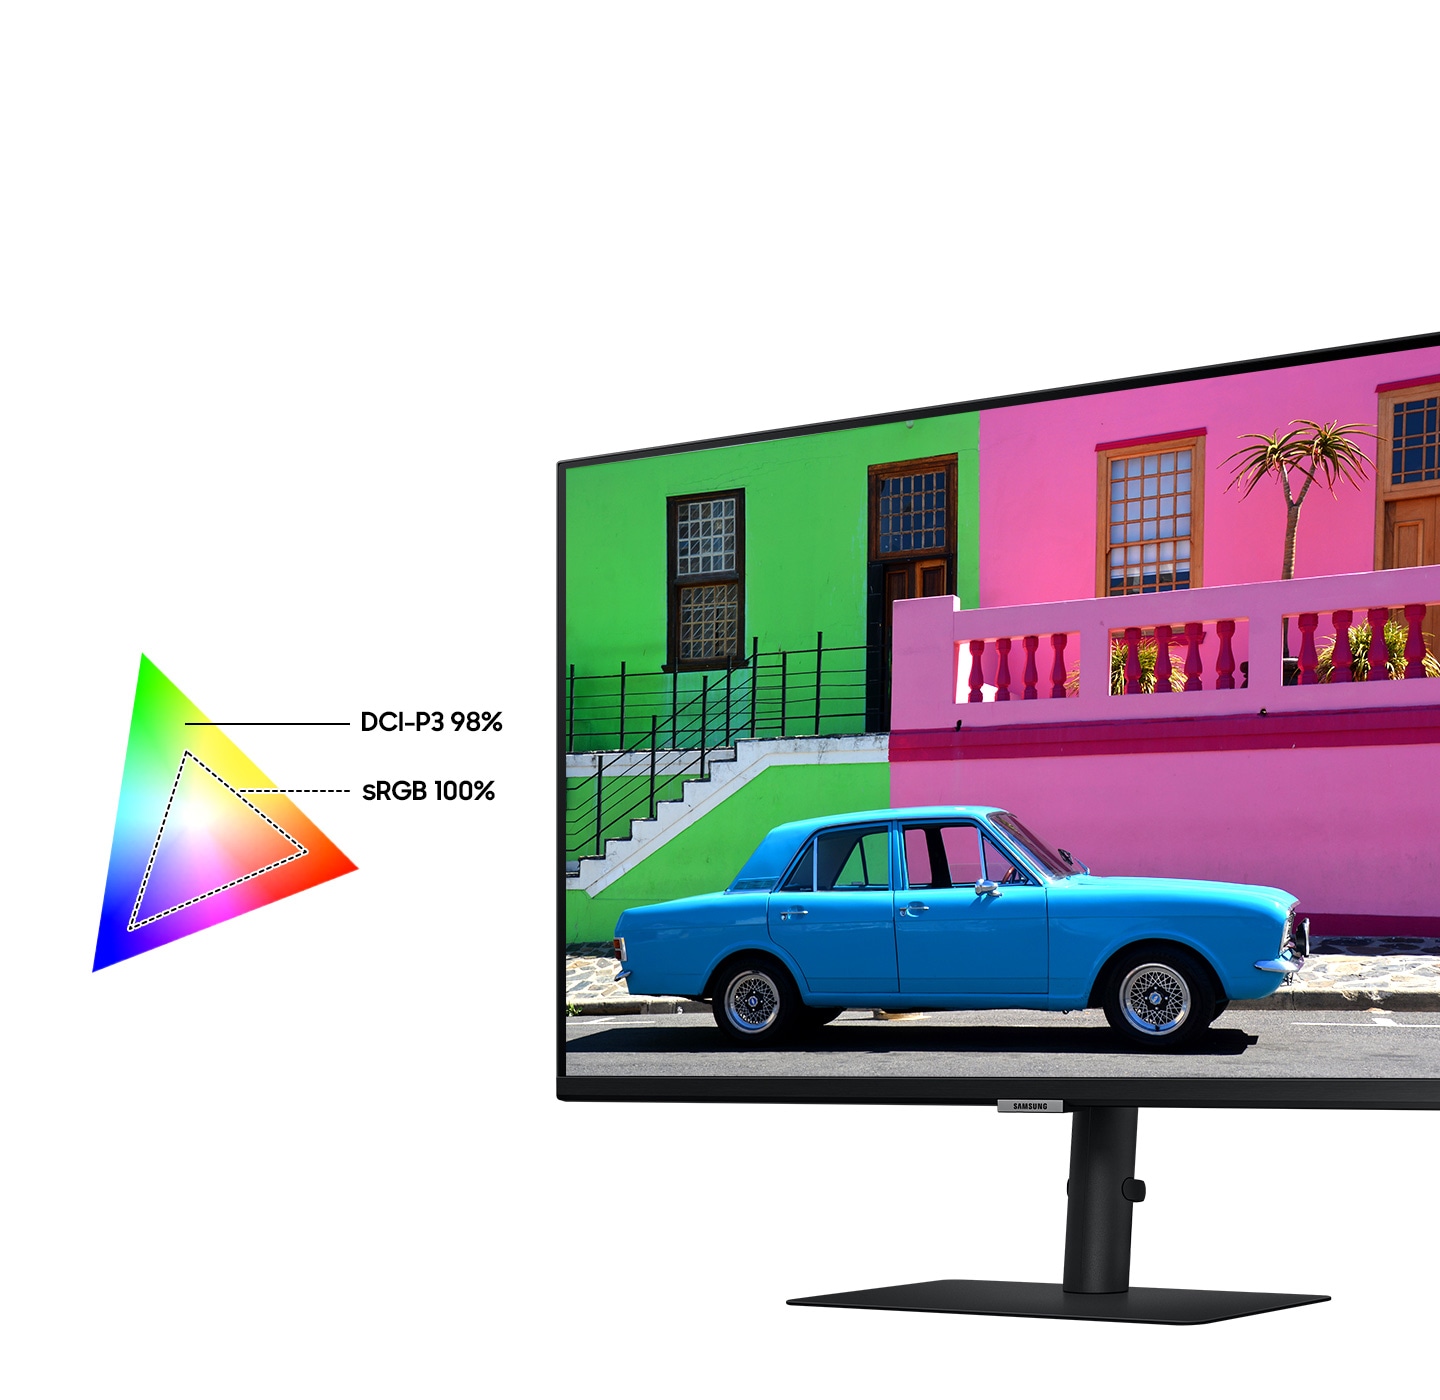 The monitor and its stand are shown tilted to the left. On the screen is a car driving along a street from left to right against a backdrop of houses. A color chart in a triangular shape on the side of the monitor shows wider range of color with DCI-P3 98% compared to the range of sRGB 100%.